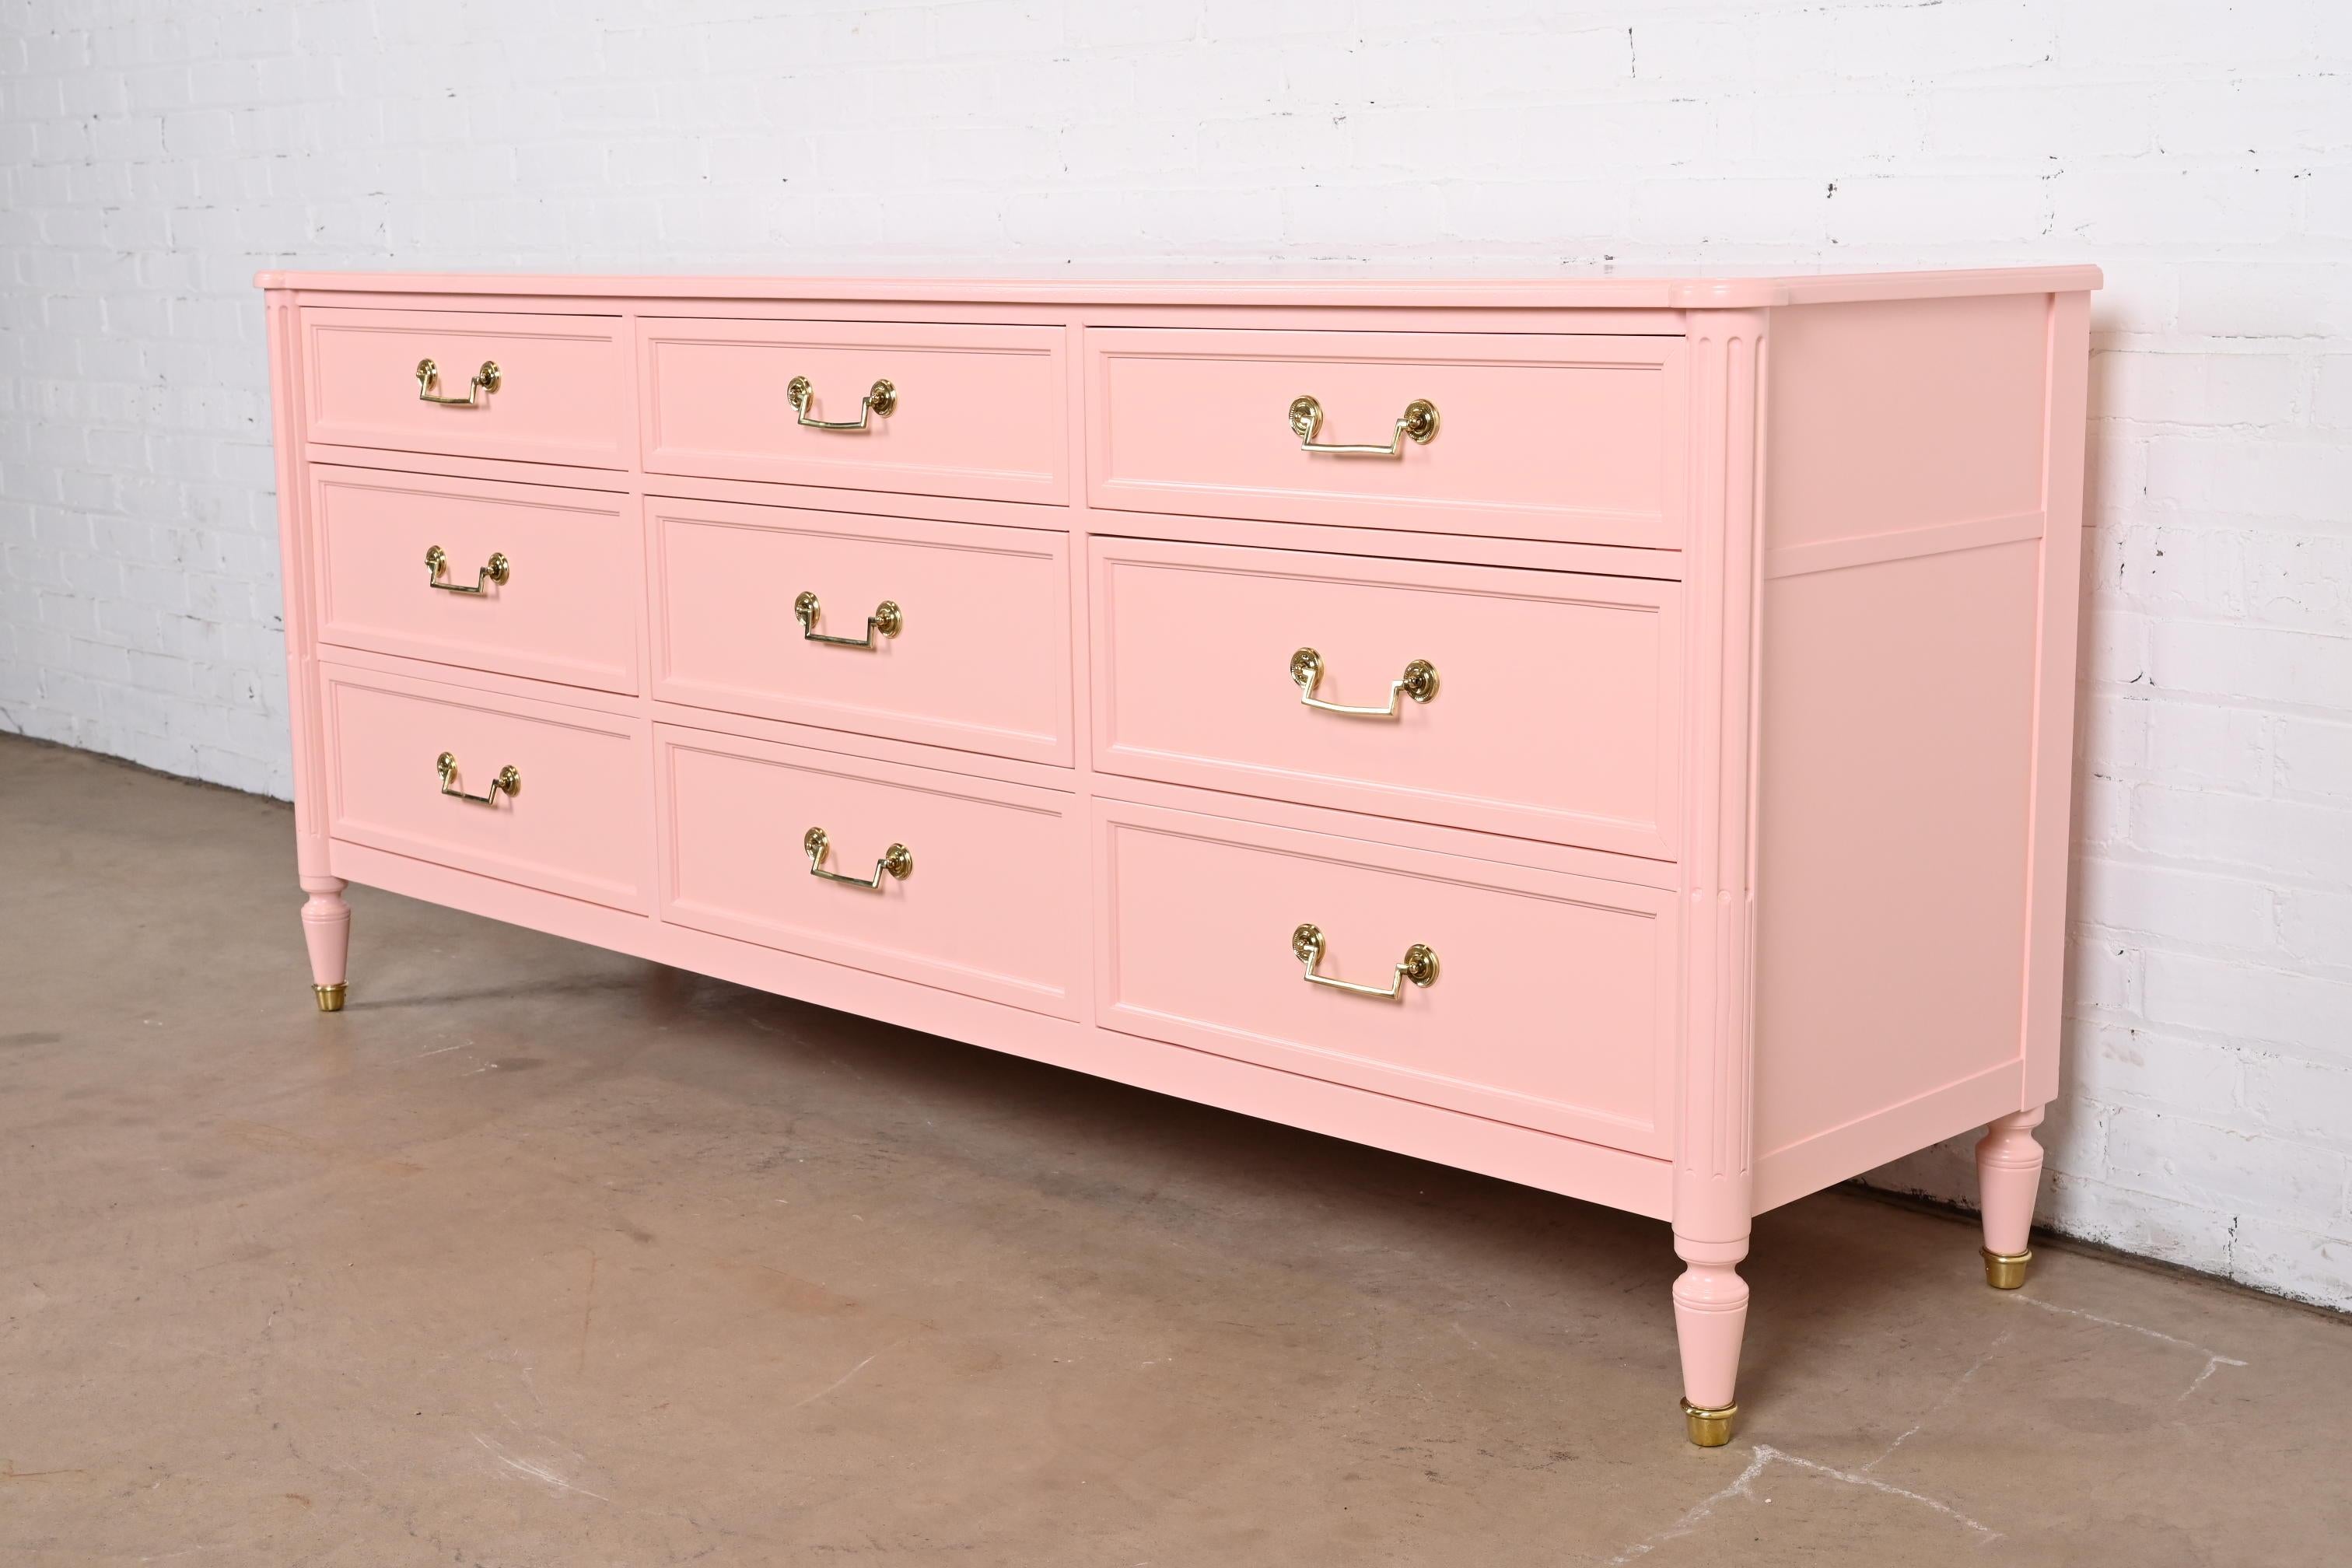 A gorgeous French Regency Louis XVI style nine-drawer triple dresser or credenza

By Baker Furniture, 